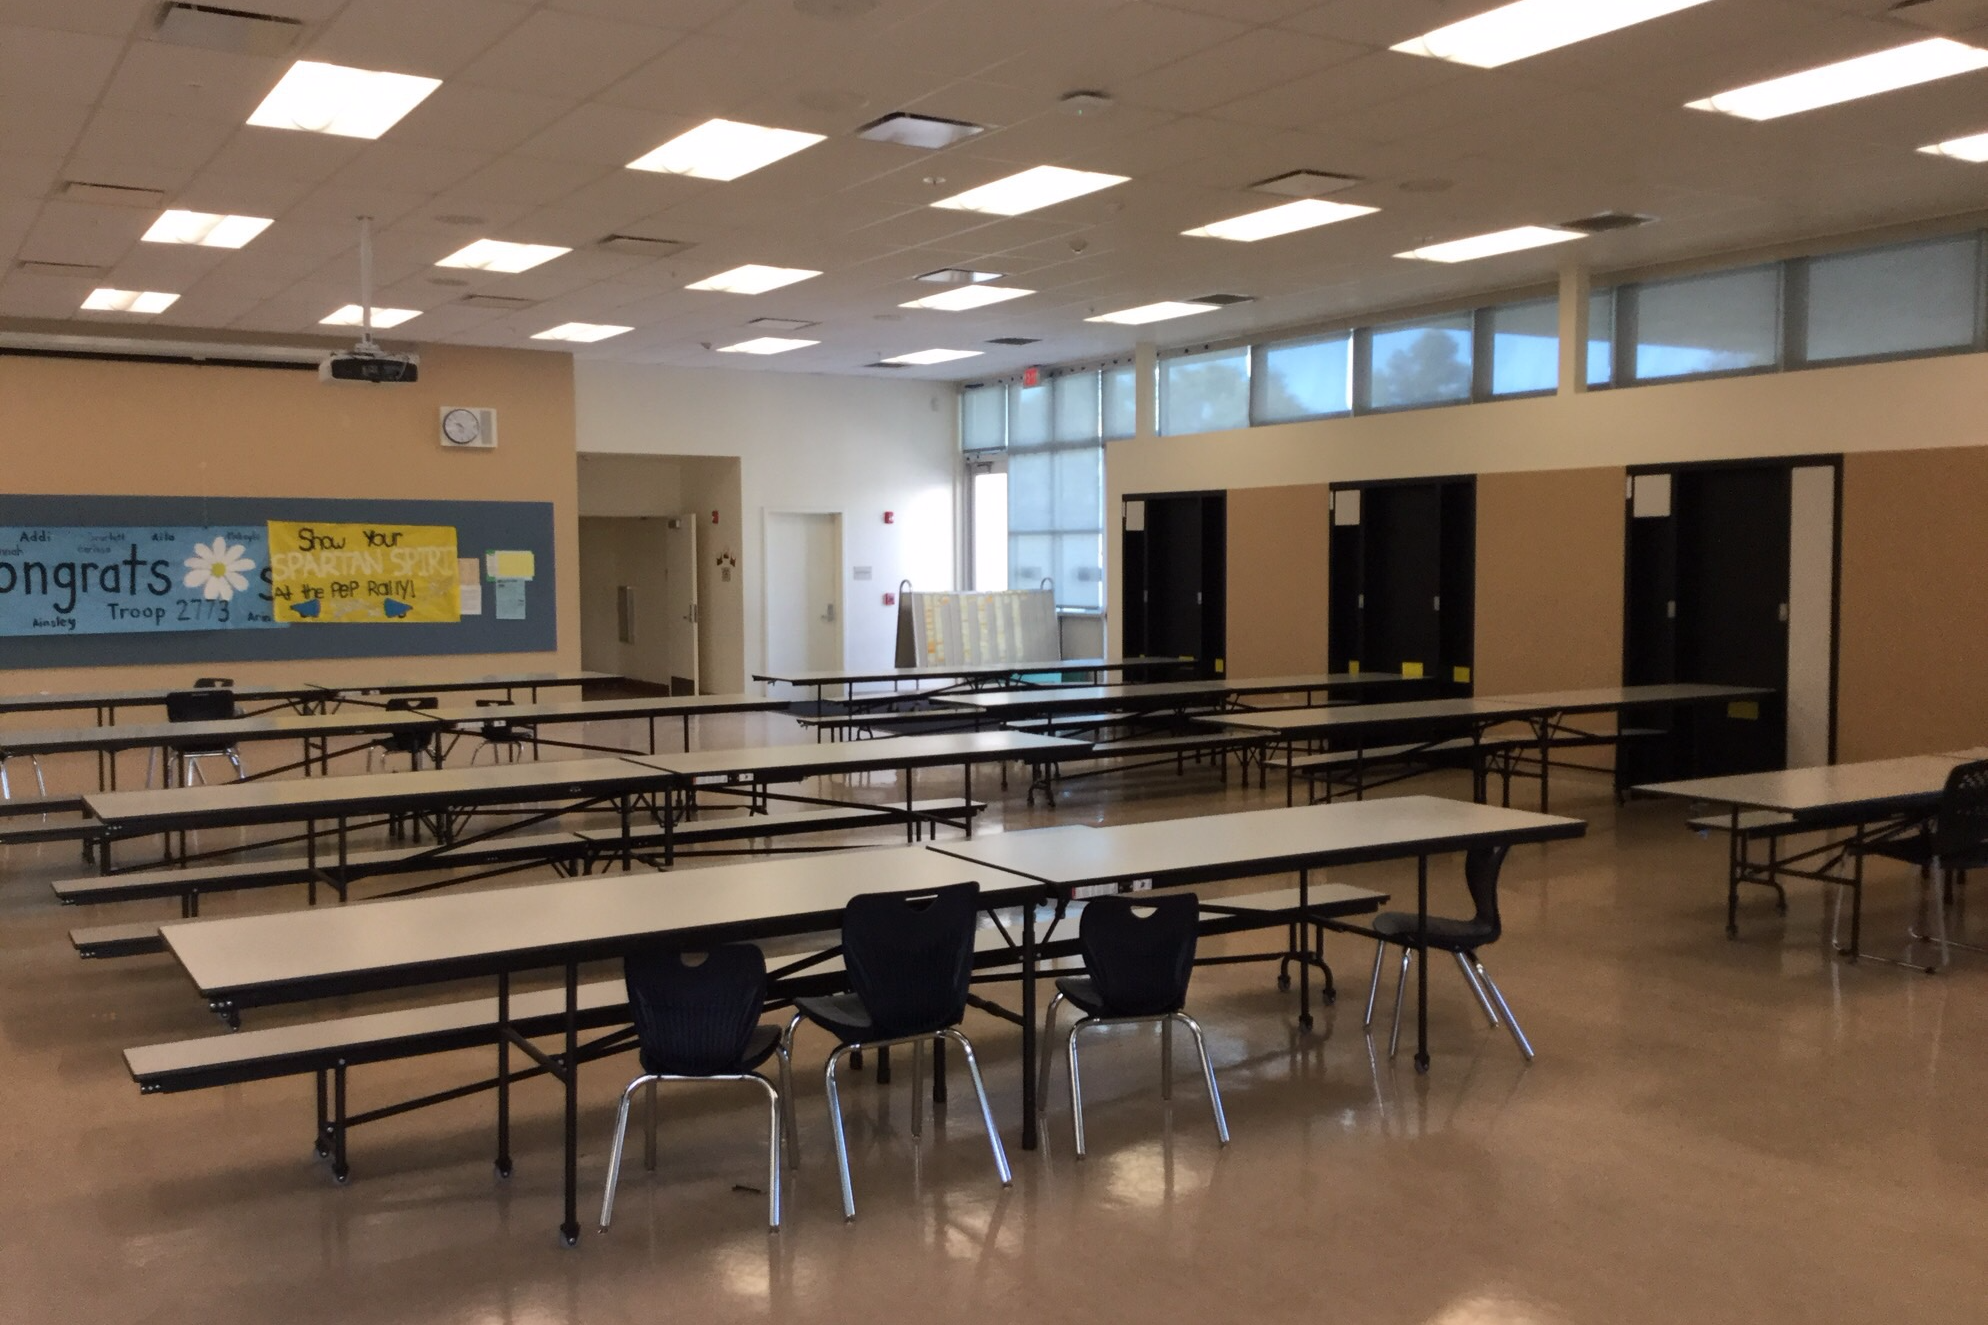 Cafeteria Dining Room